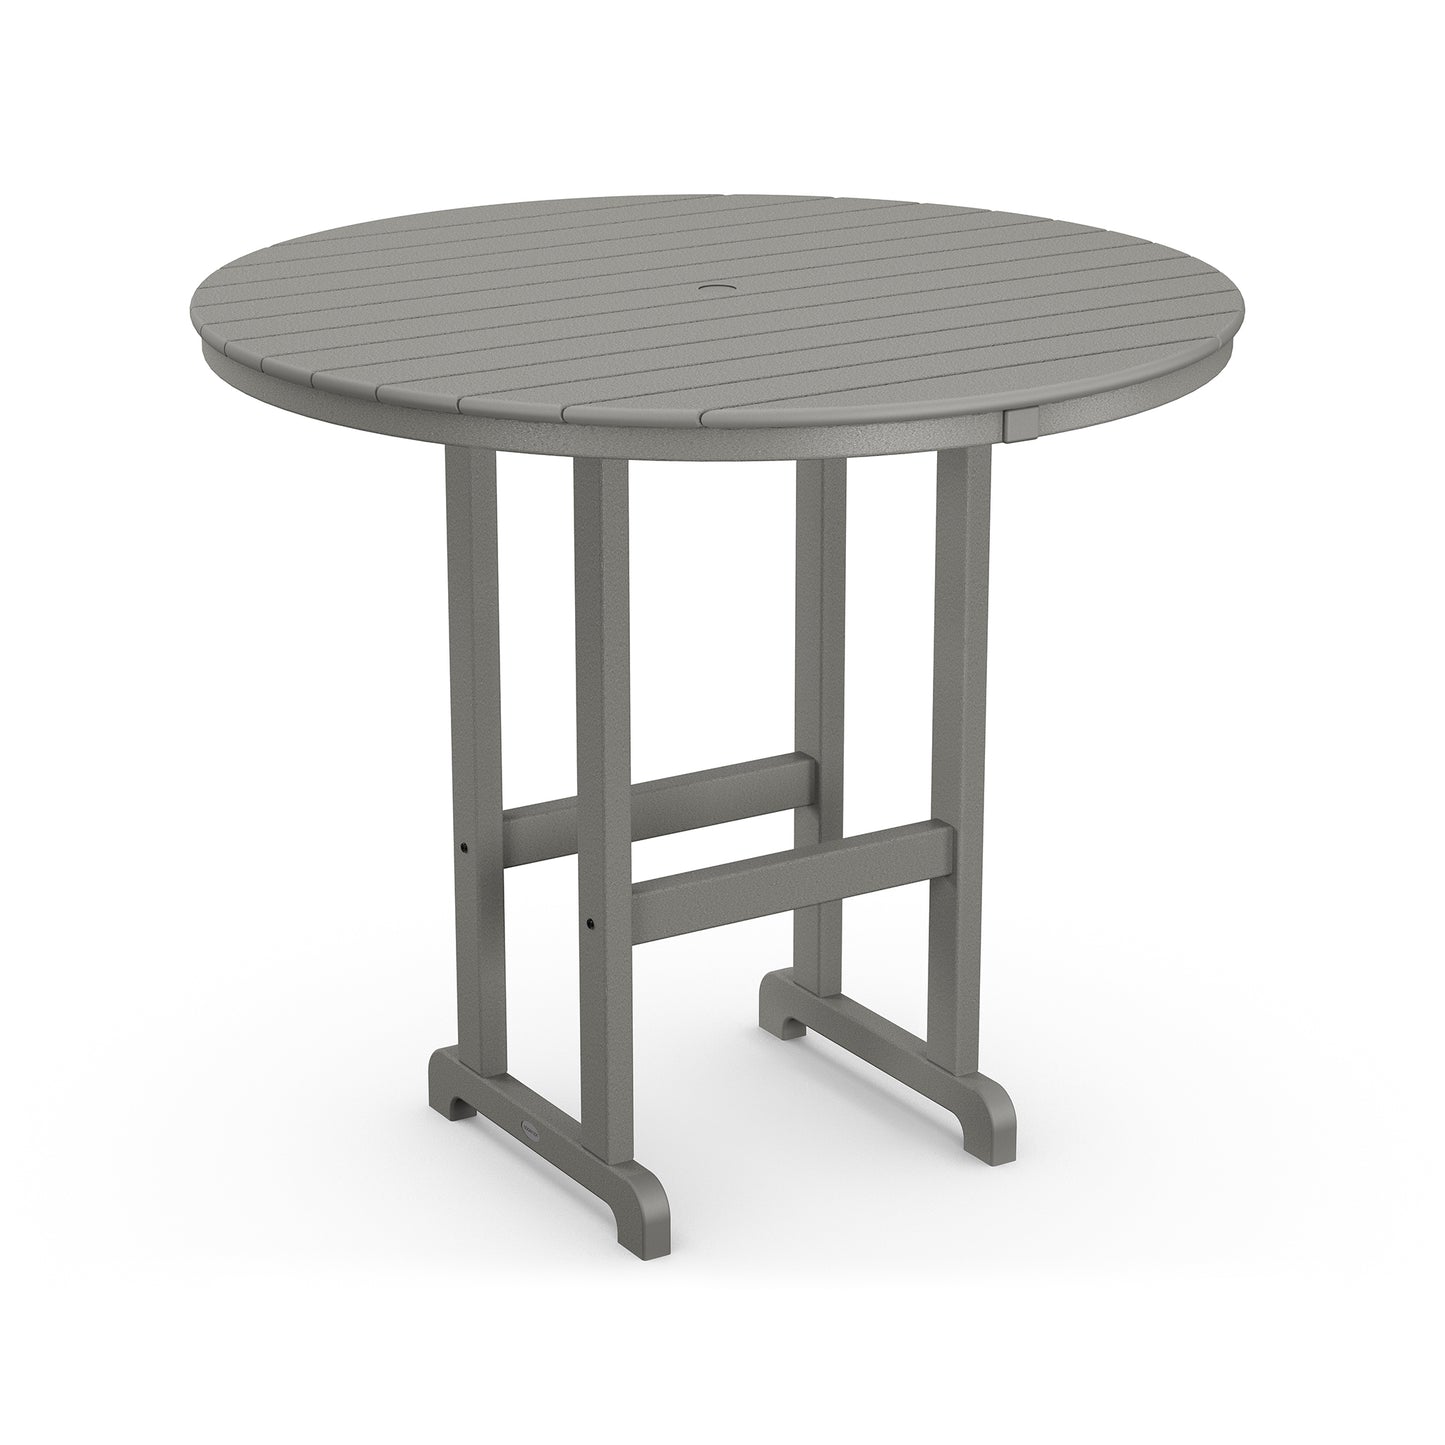 A round, gray POLYWOOD® Outdoor 48" Round Bar Table with a slatted top and sturdy metal frame, isolated on a white background.